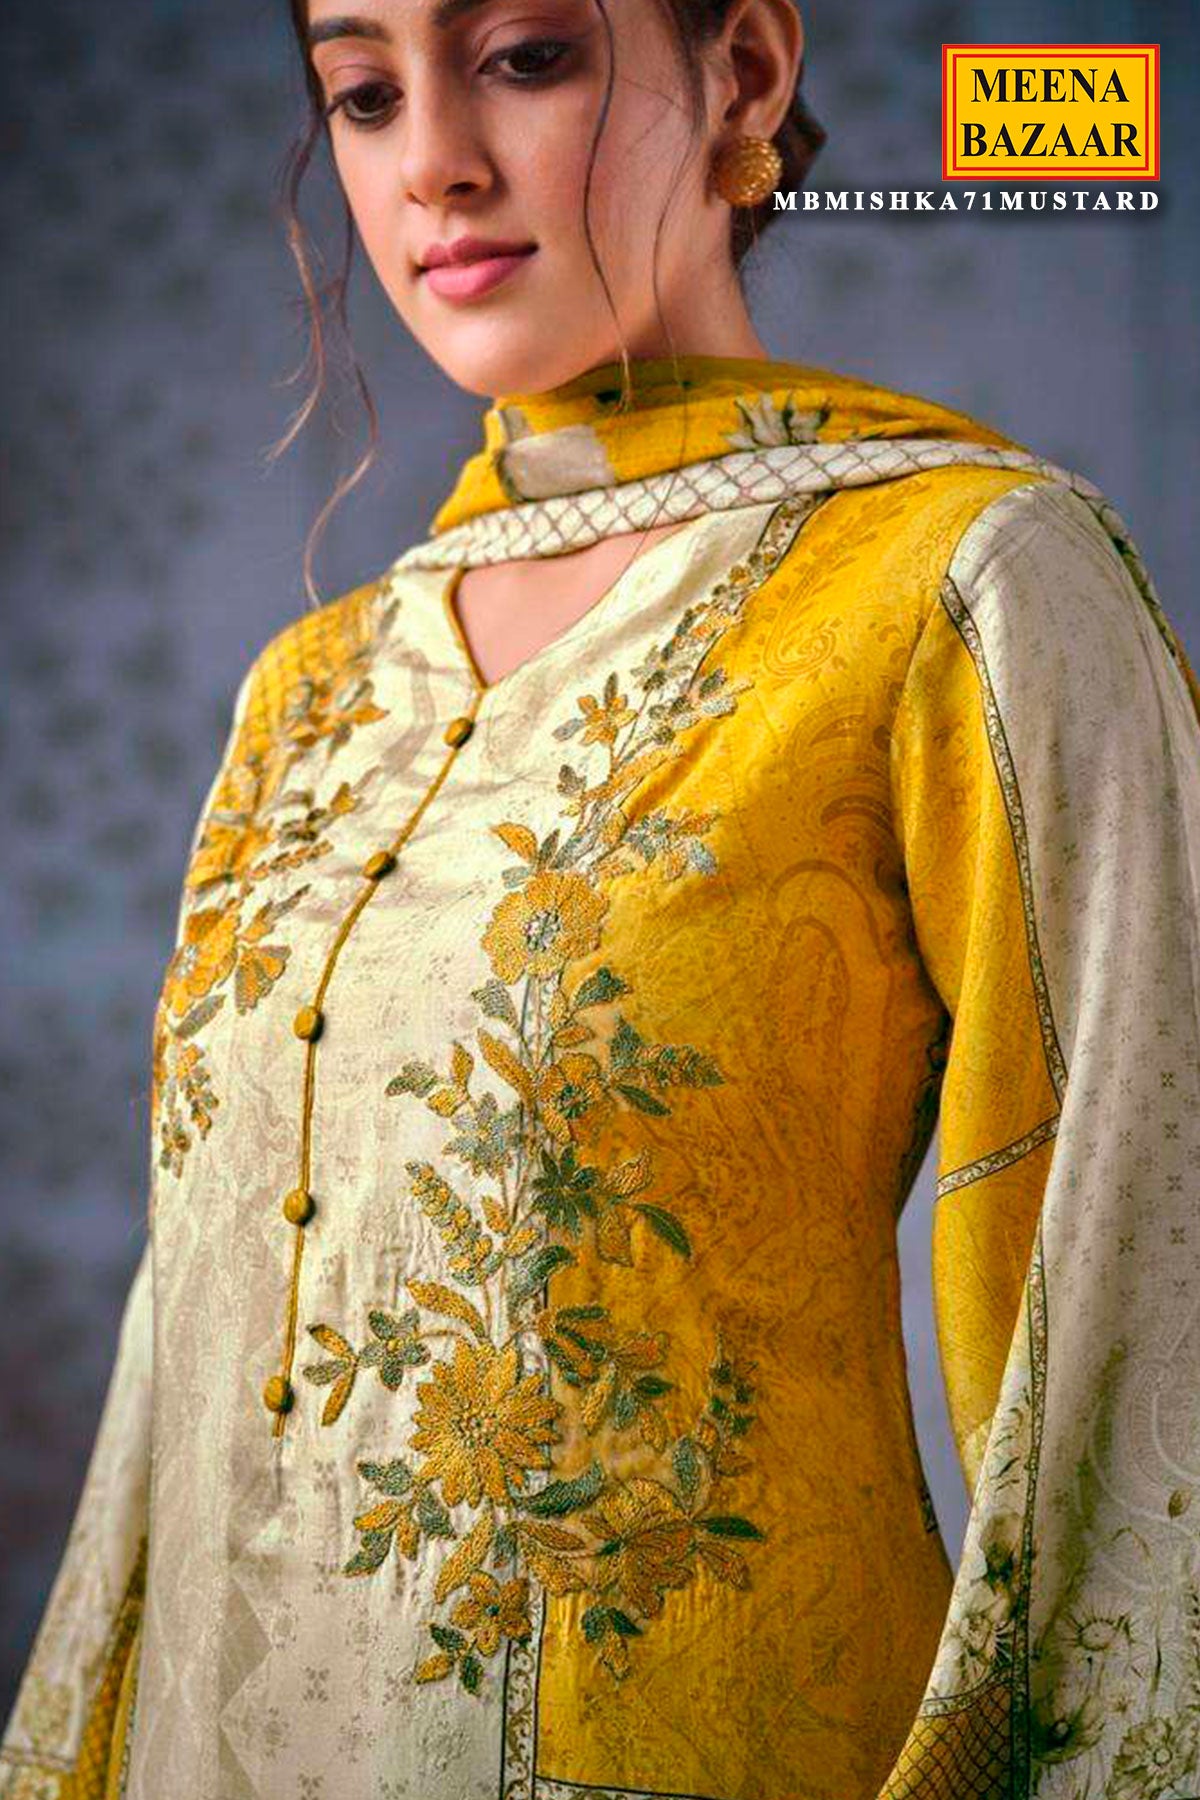 Mustard Chinon Floral Printed Floral Threadwork Embroidered Suit Set